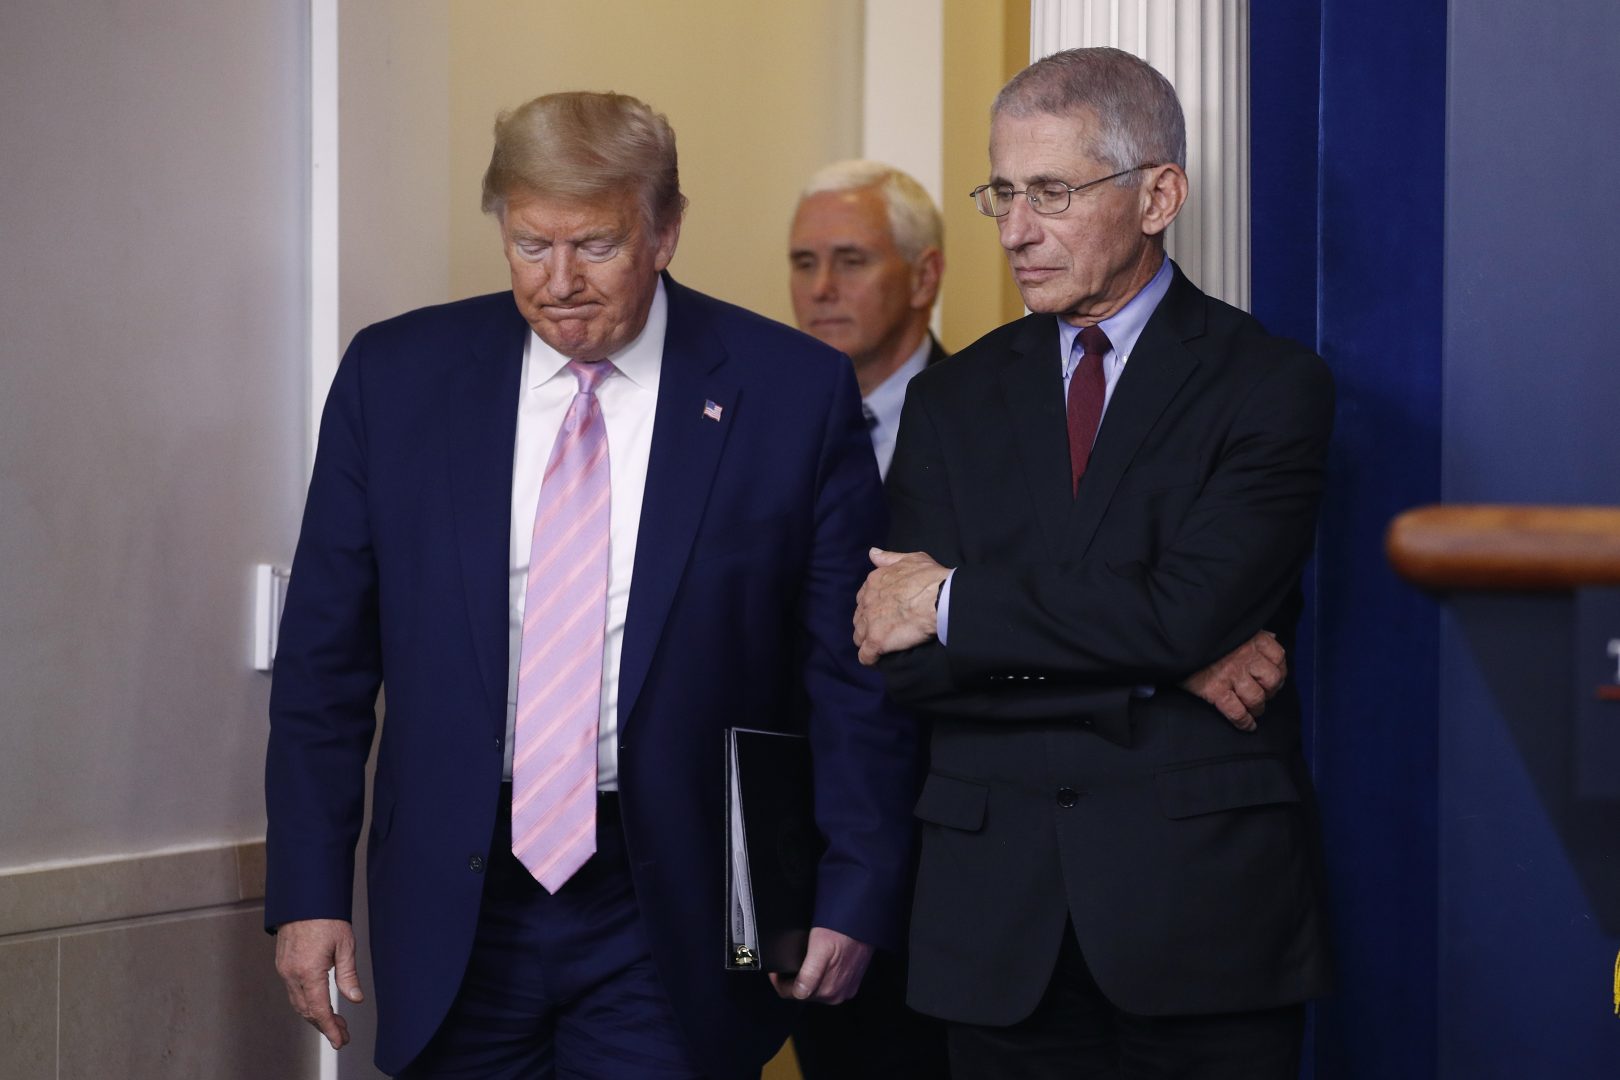 President Donald Trump walks past Dr. Anthony Fauci, right, director of the National Institute of Allergy and Infectious Diseases, as he and Vice President Mike Pence arrive to speak at a coronavirus task force briefing at the White House, Saturday, April 4, 2020, in Washington. 